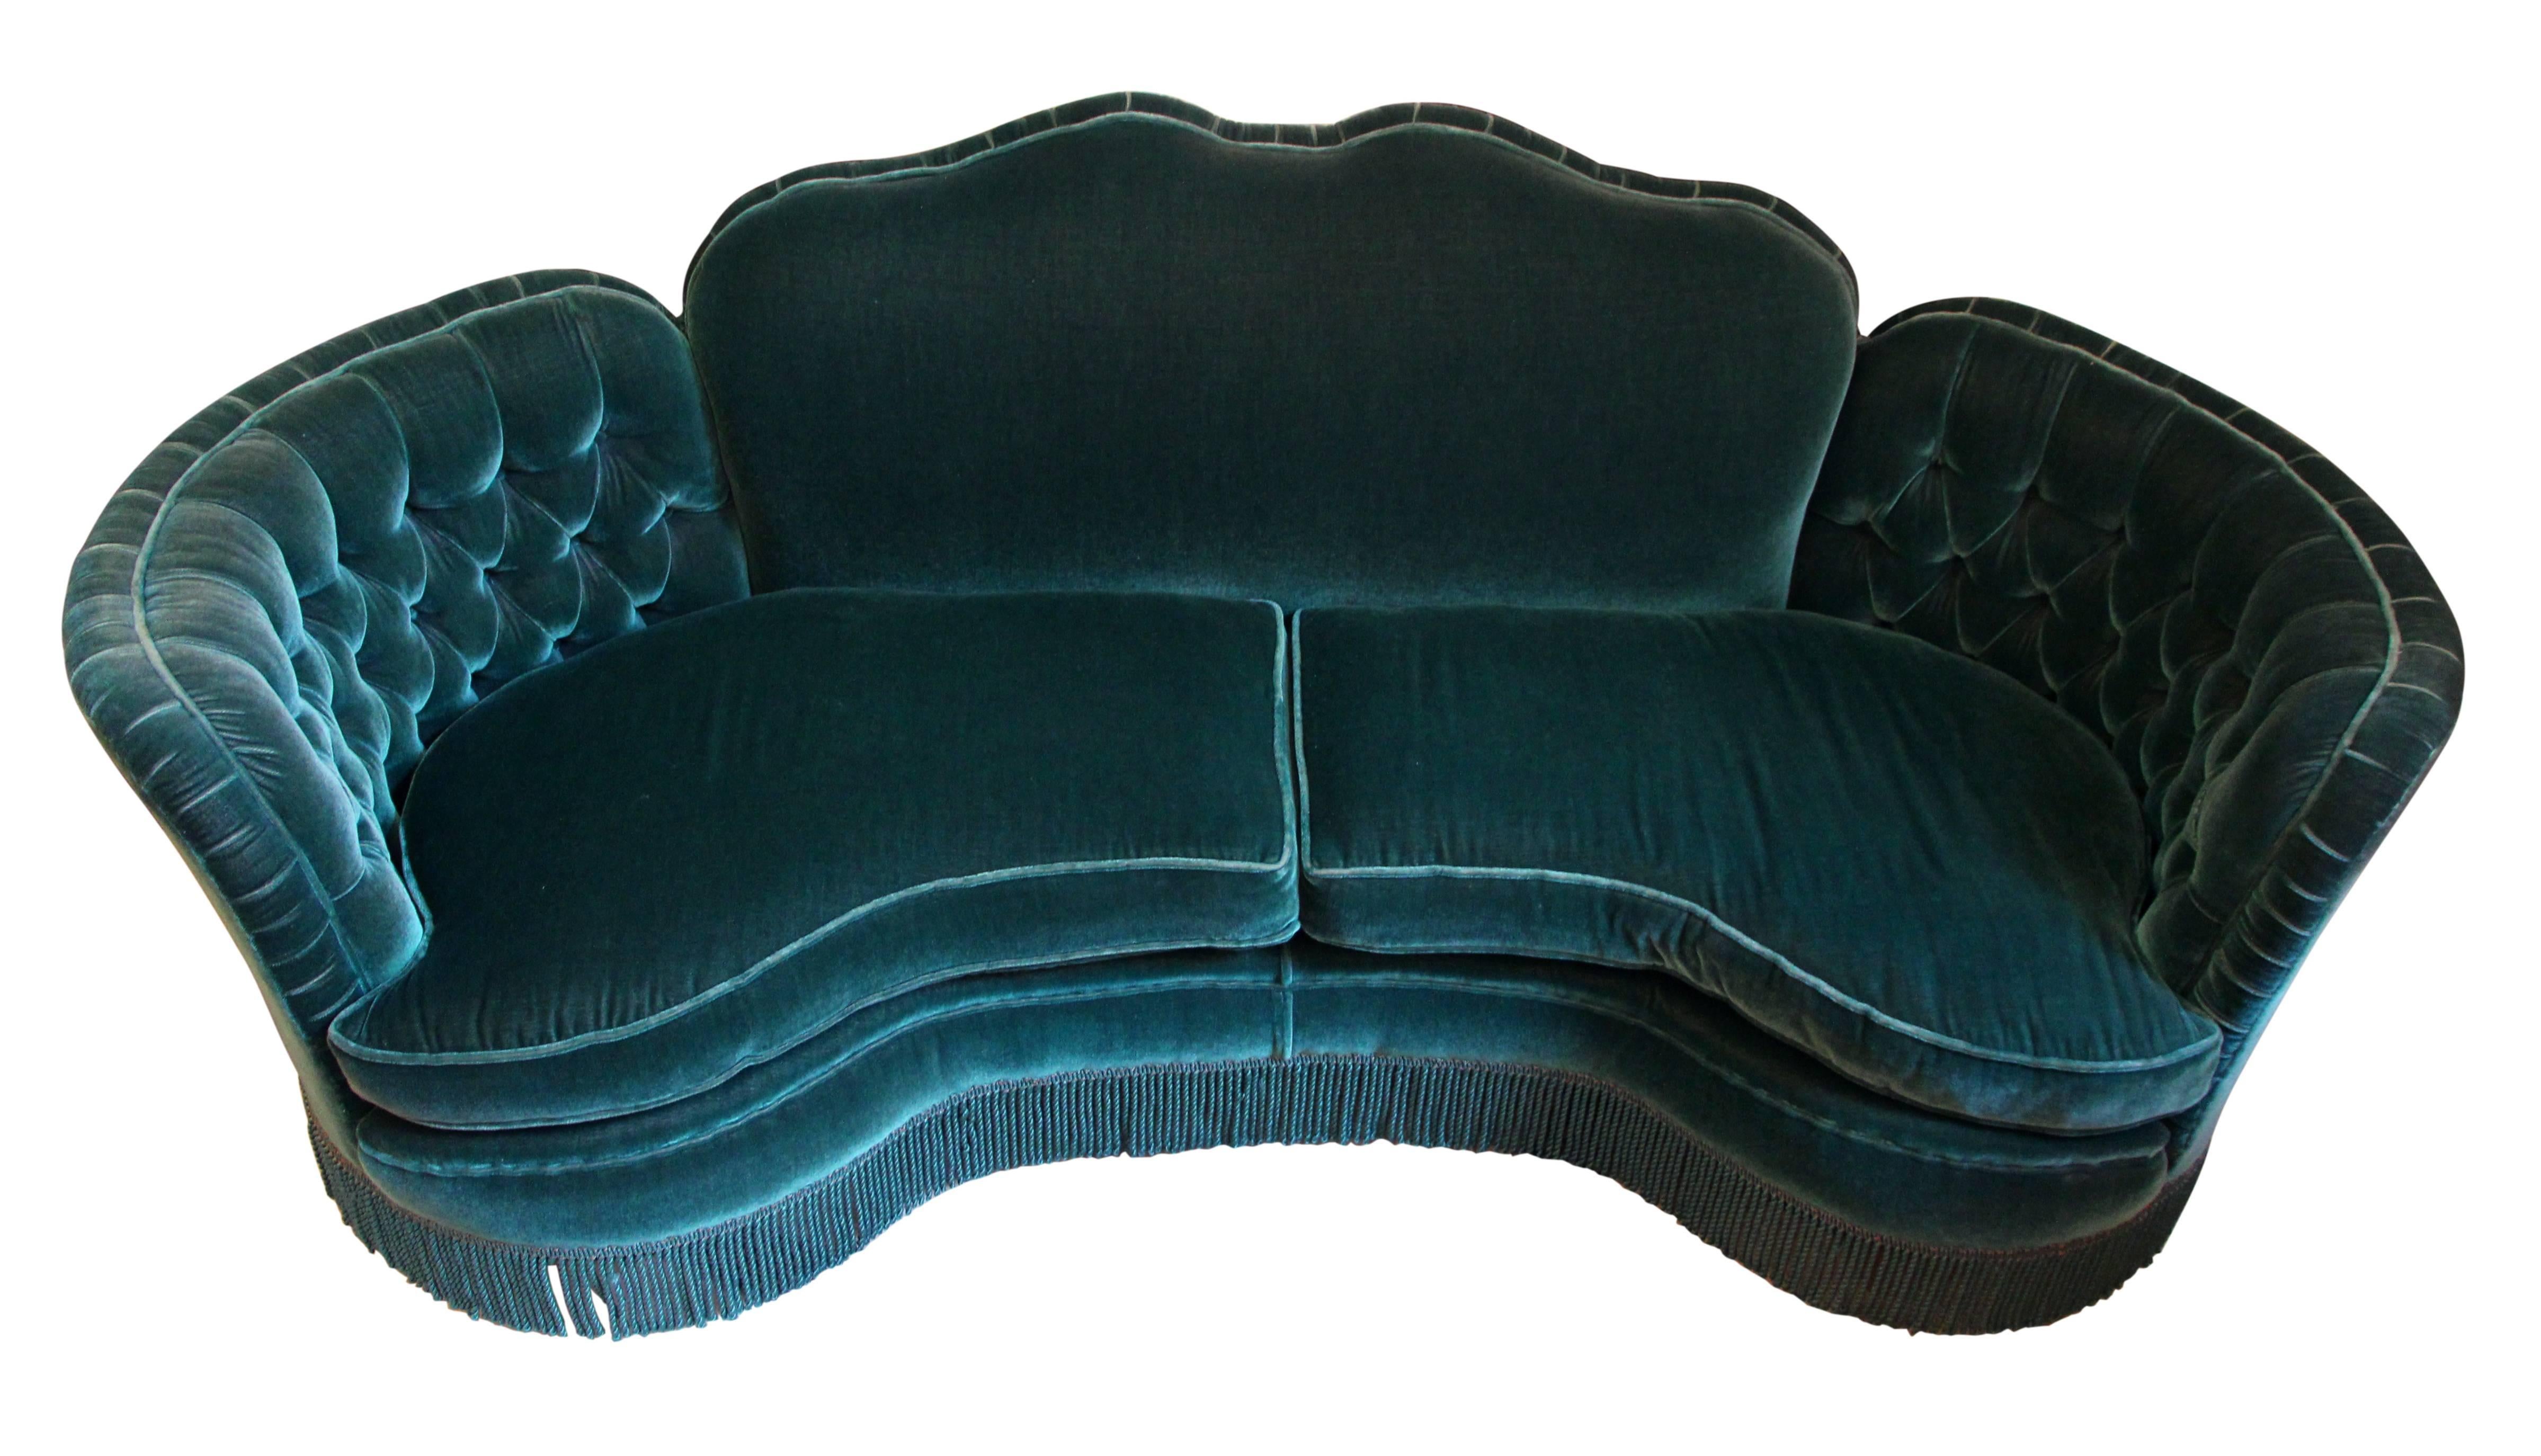 1951 emerald green tufted curved original mohair sofa in overall excellent condition, with a small rip in the backside. Stayed in an unused sitting room for 66 years. Custom-made in northeast PA. This item can be viewed at our 5 East 16th St, Union